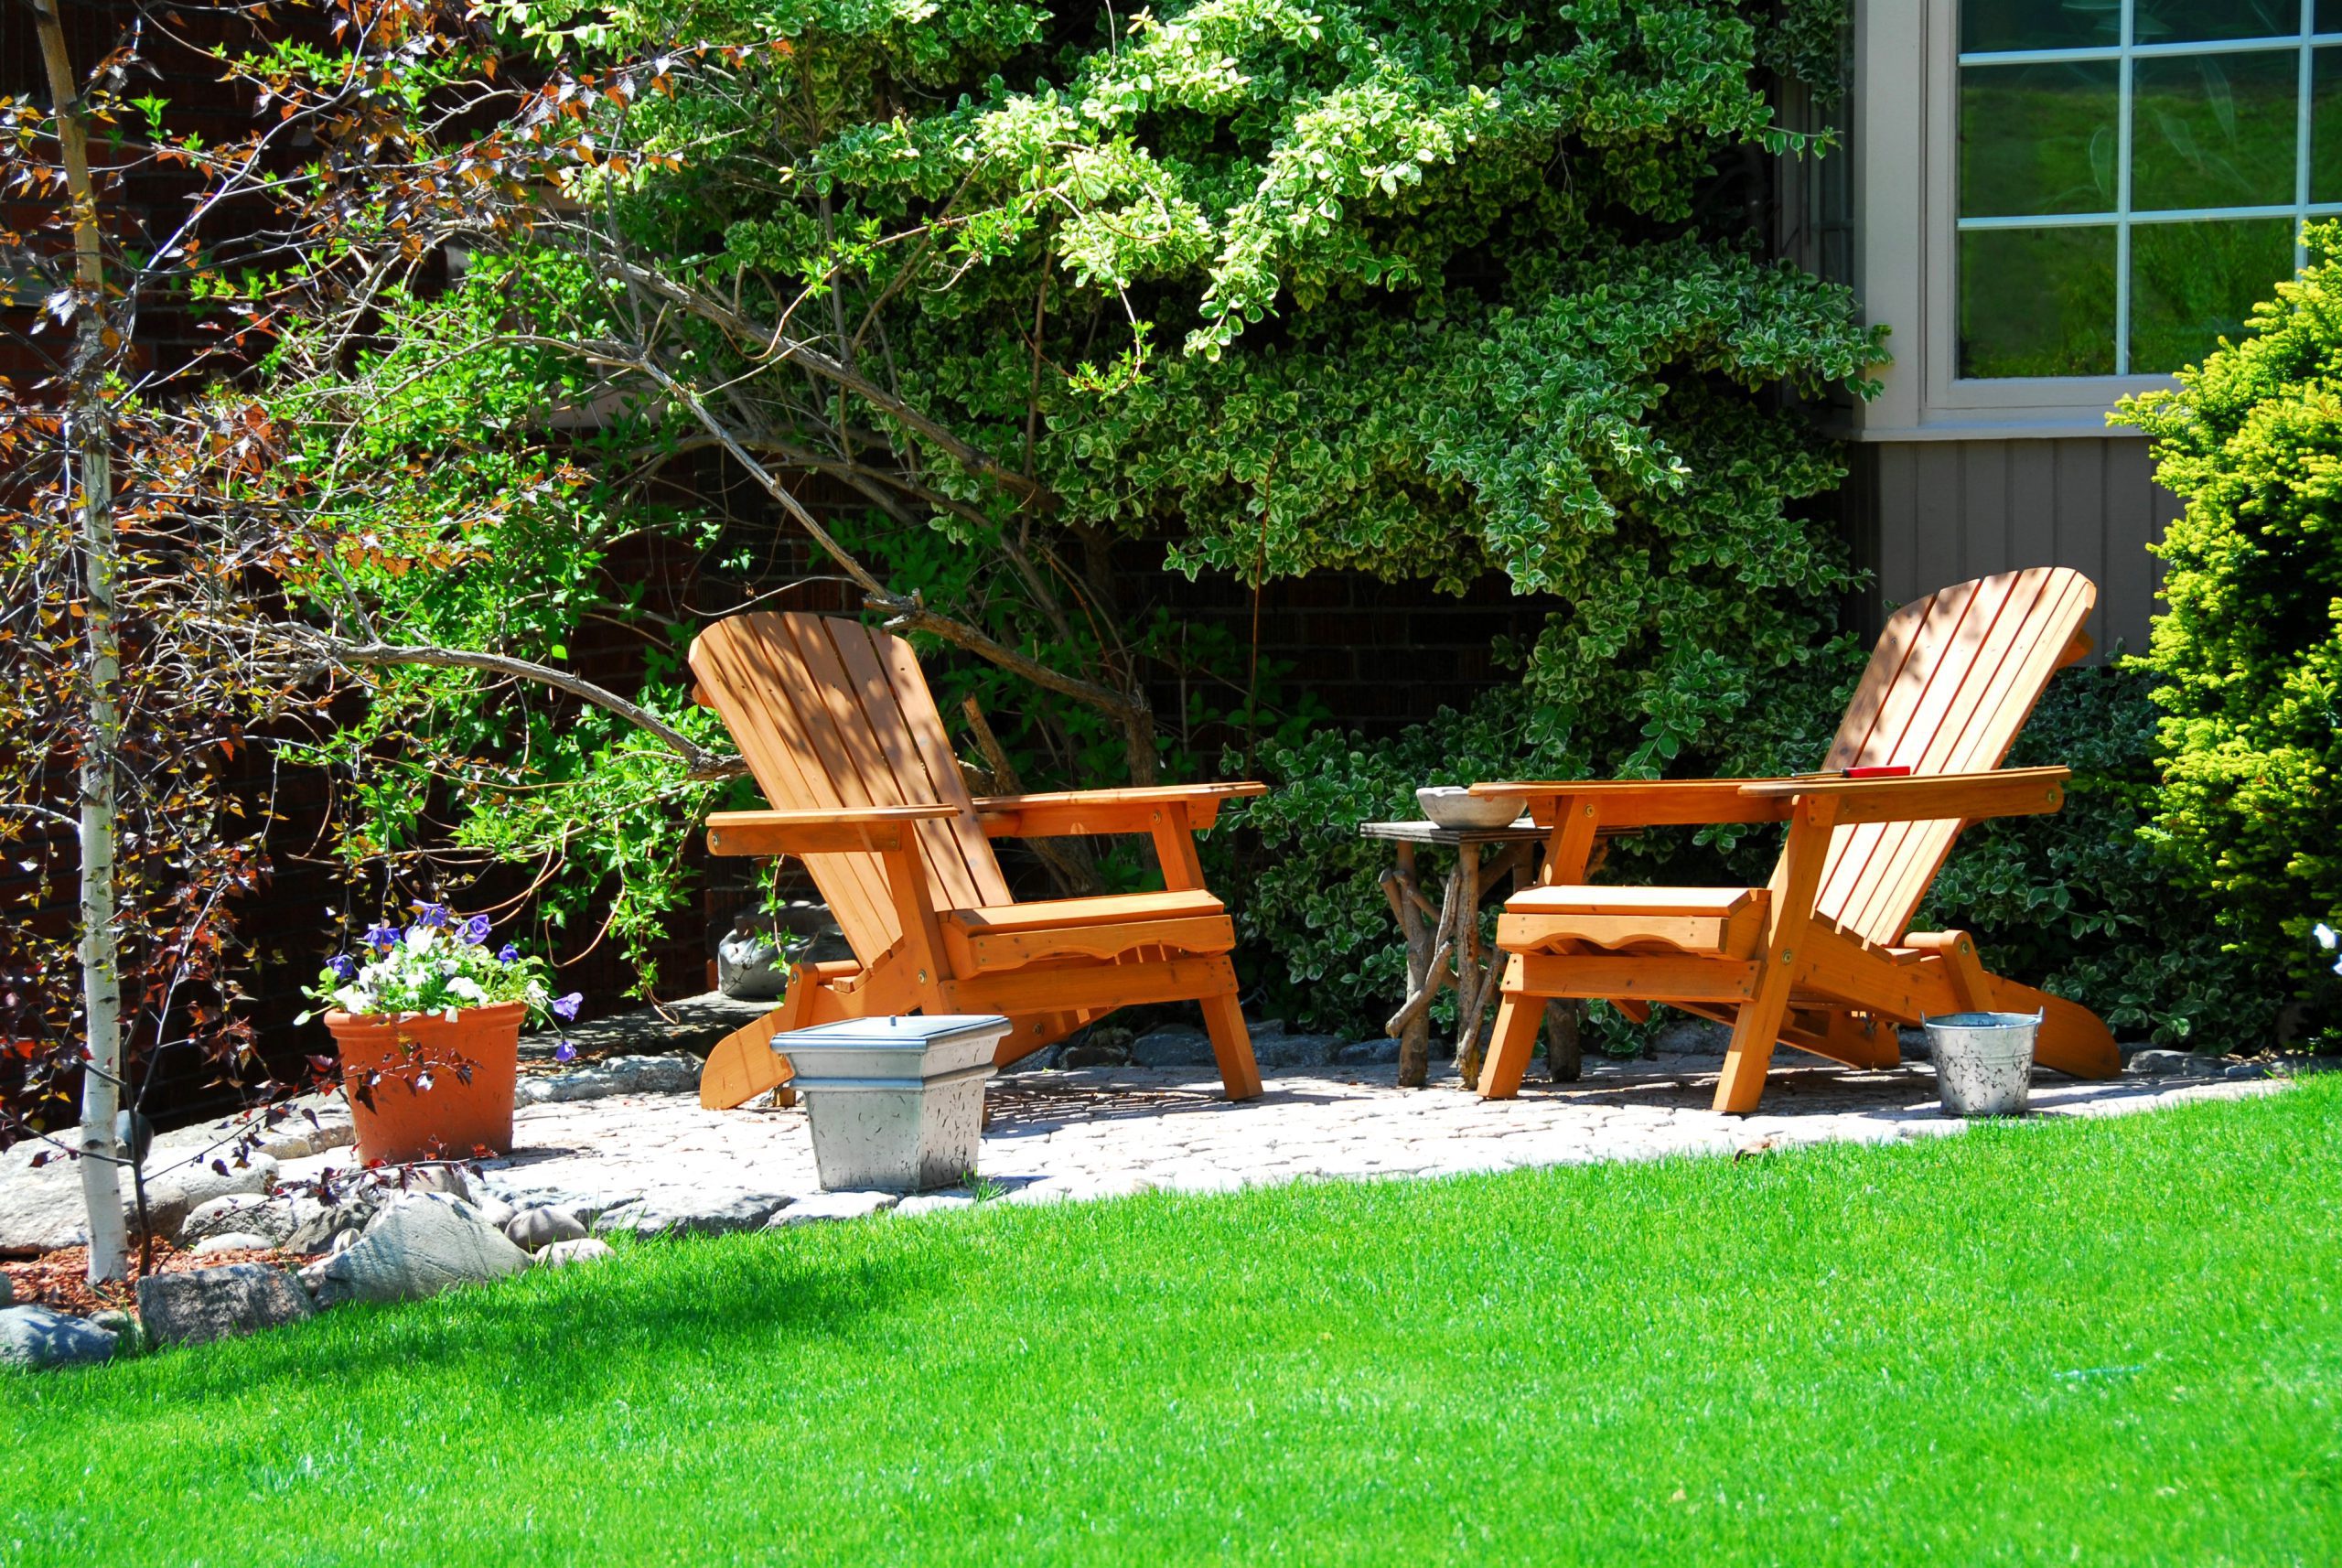 Lawn Care in Detroit, MI: What To Know